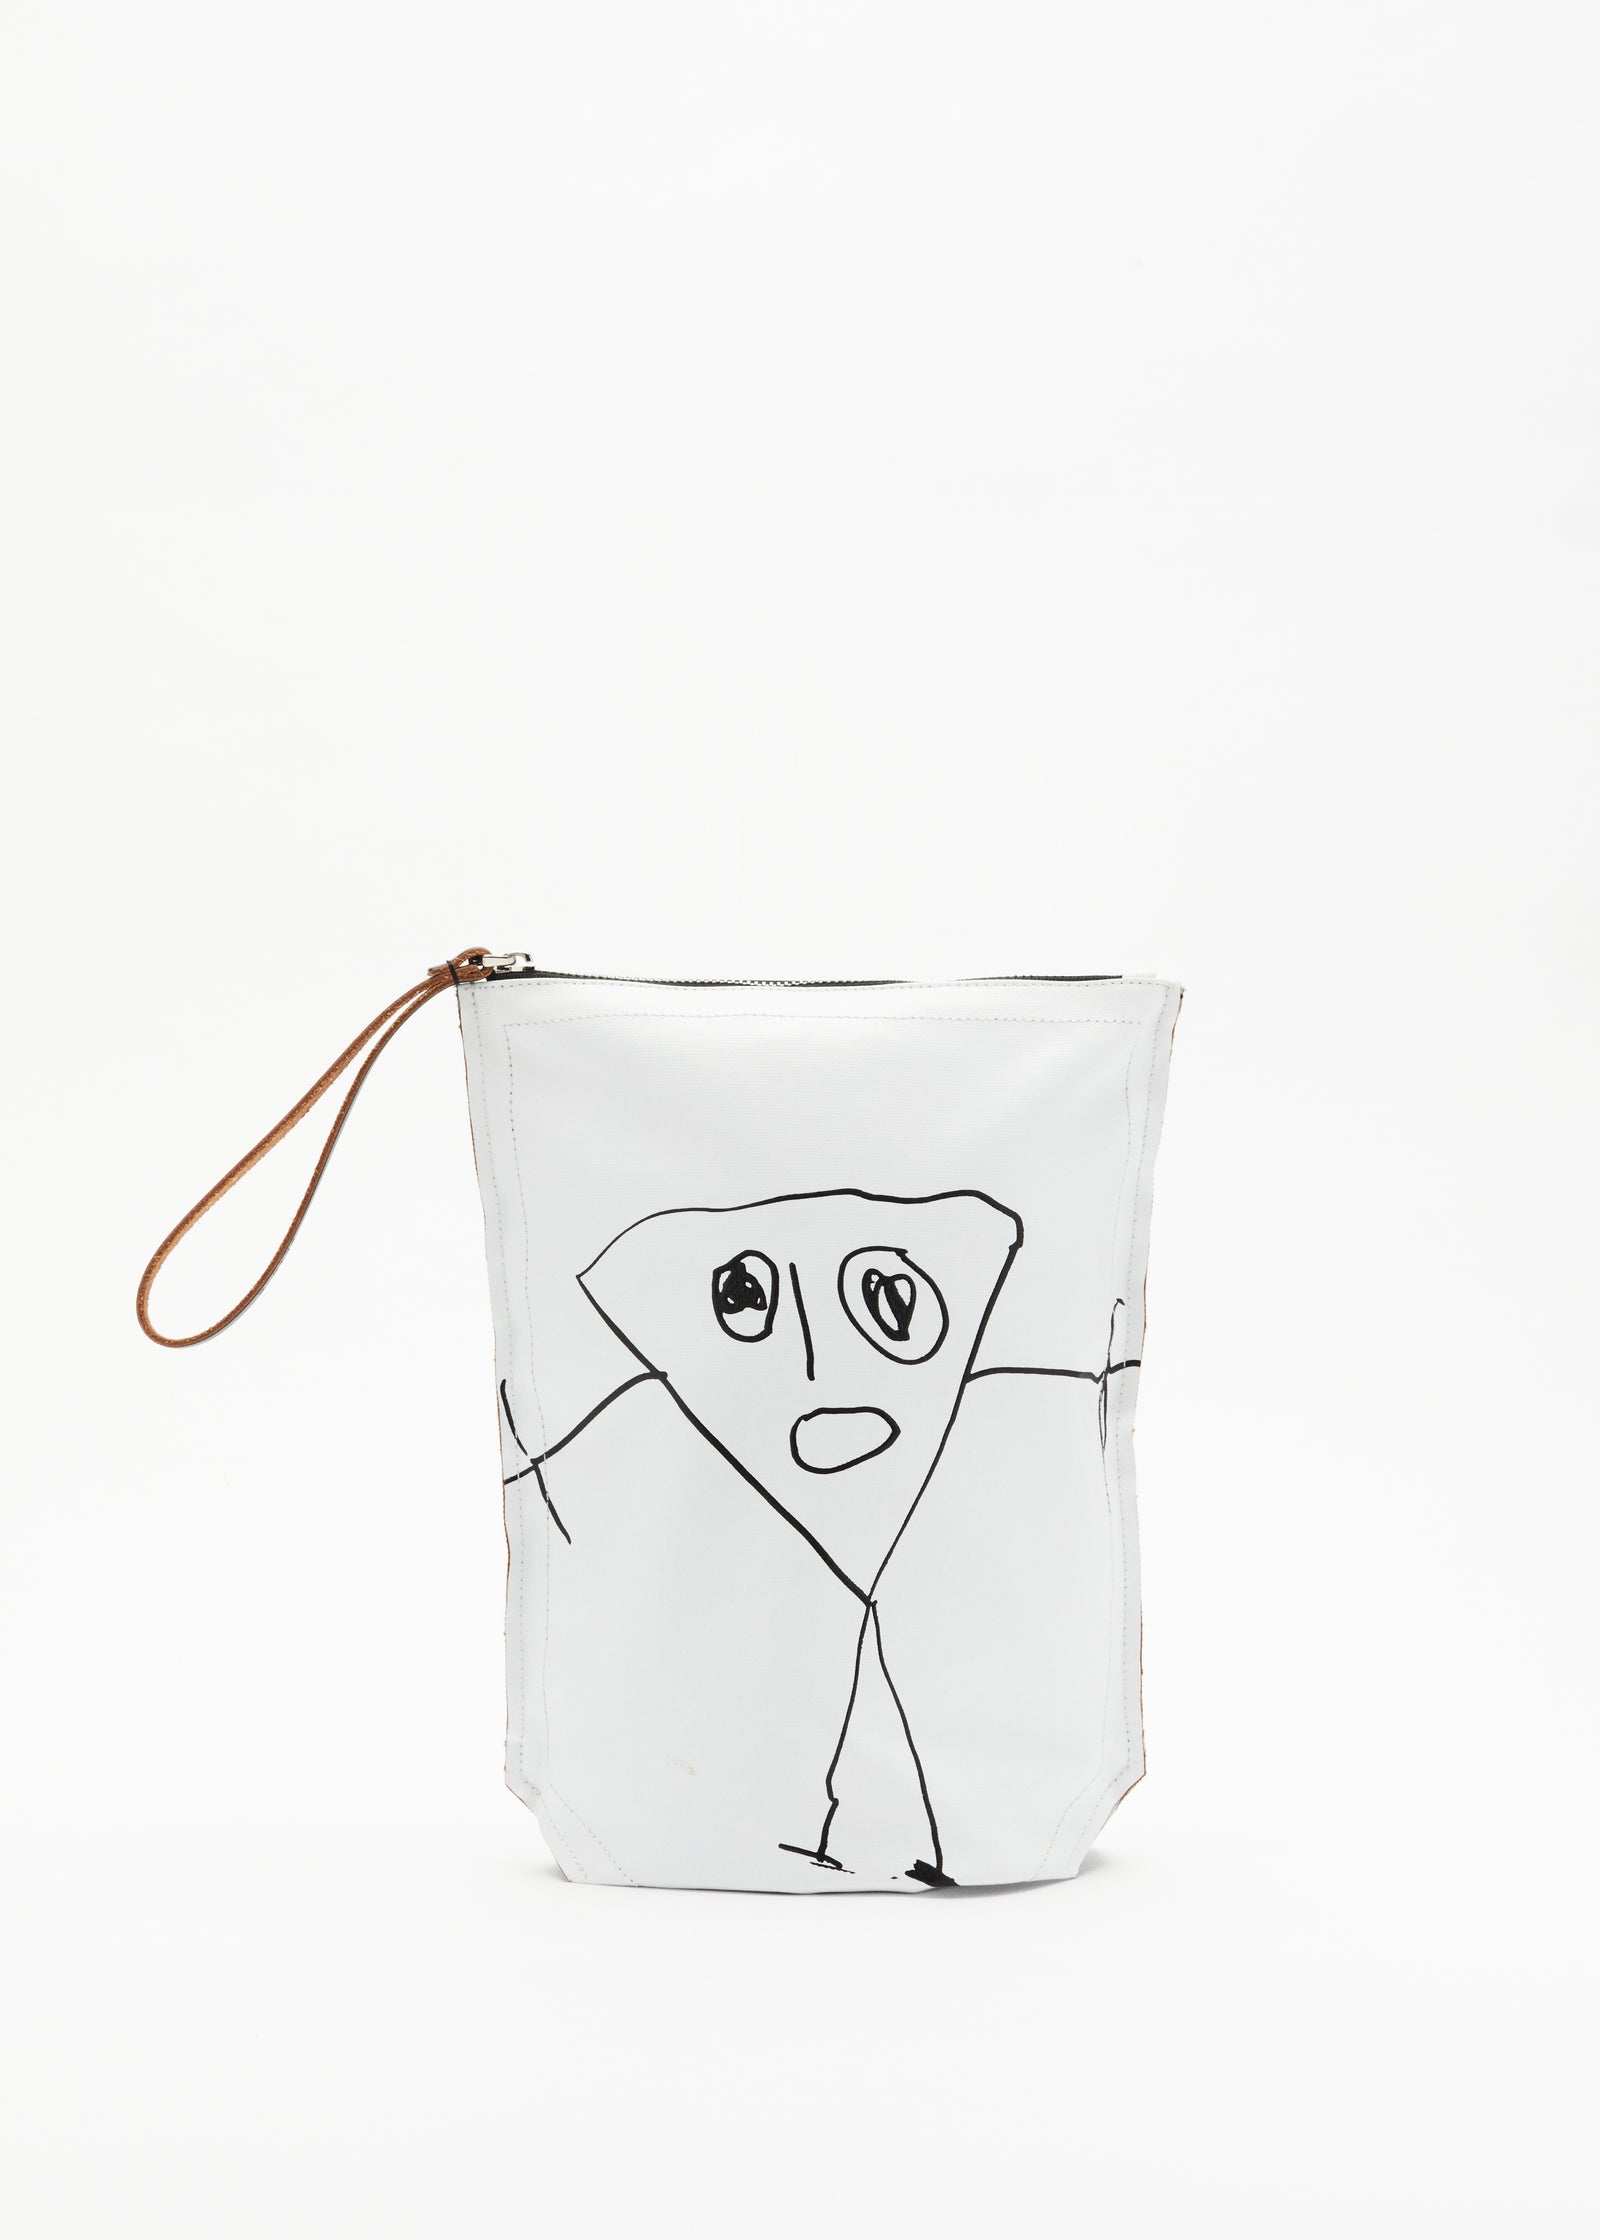 "PILI AND BIANCA" WHITE POUCH